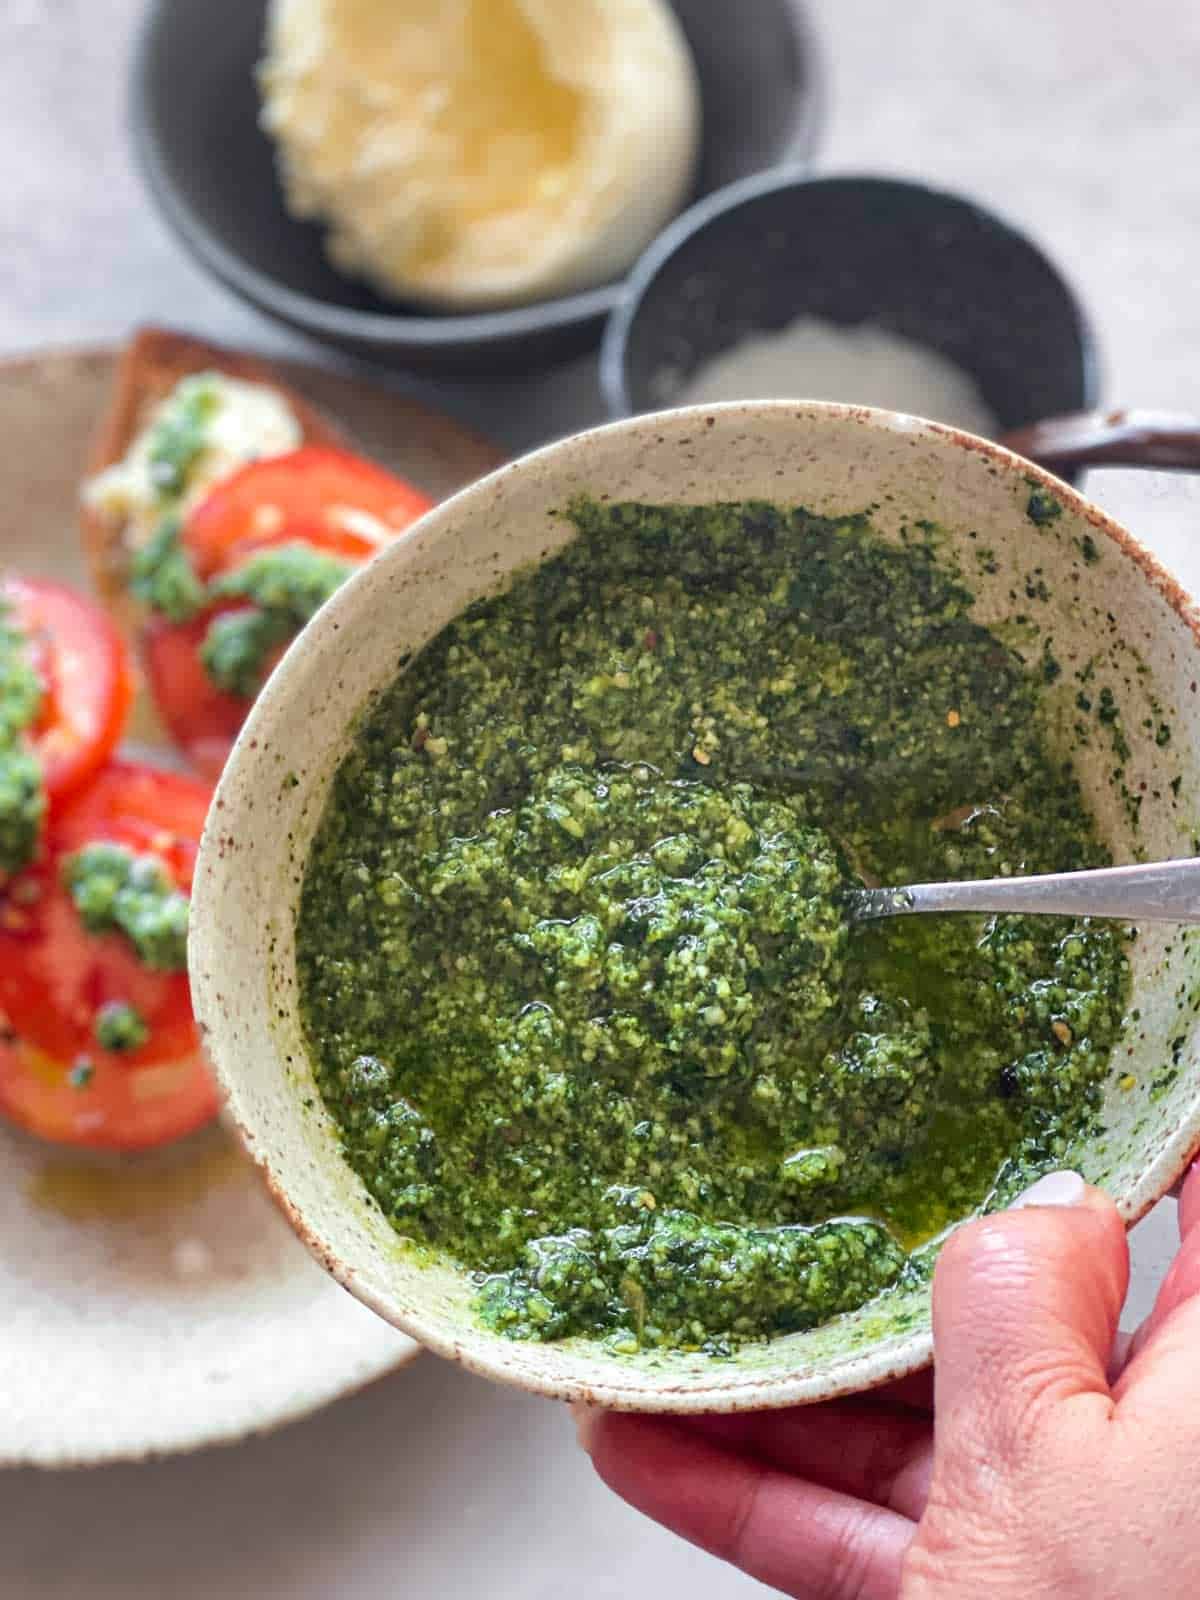 Hand holding a bowl of basil mint pesto hovering over sliced tomatoes and burrata